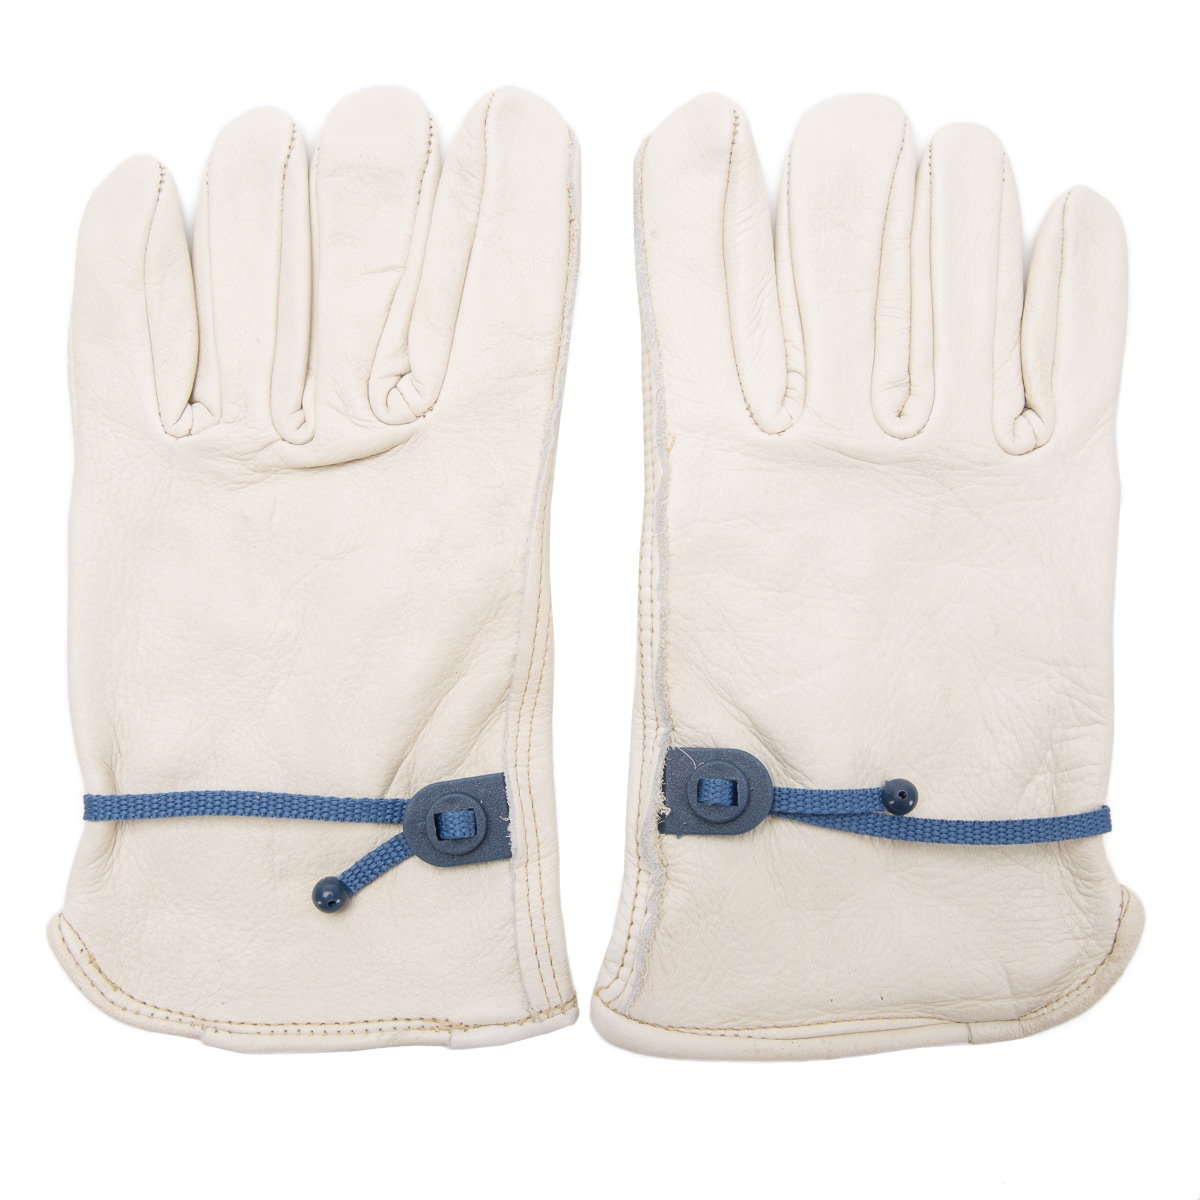 Firm Grip Large Utility Work Gloves (9-Pair), Assorted Colors 34301